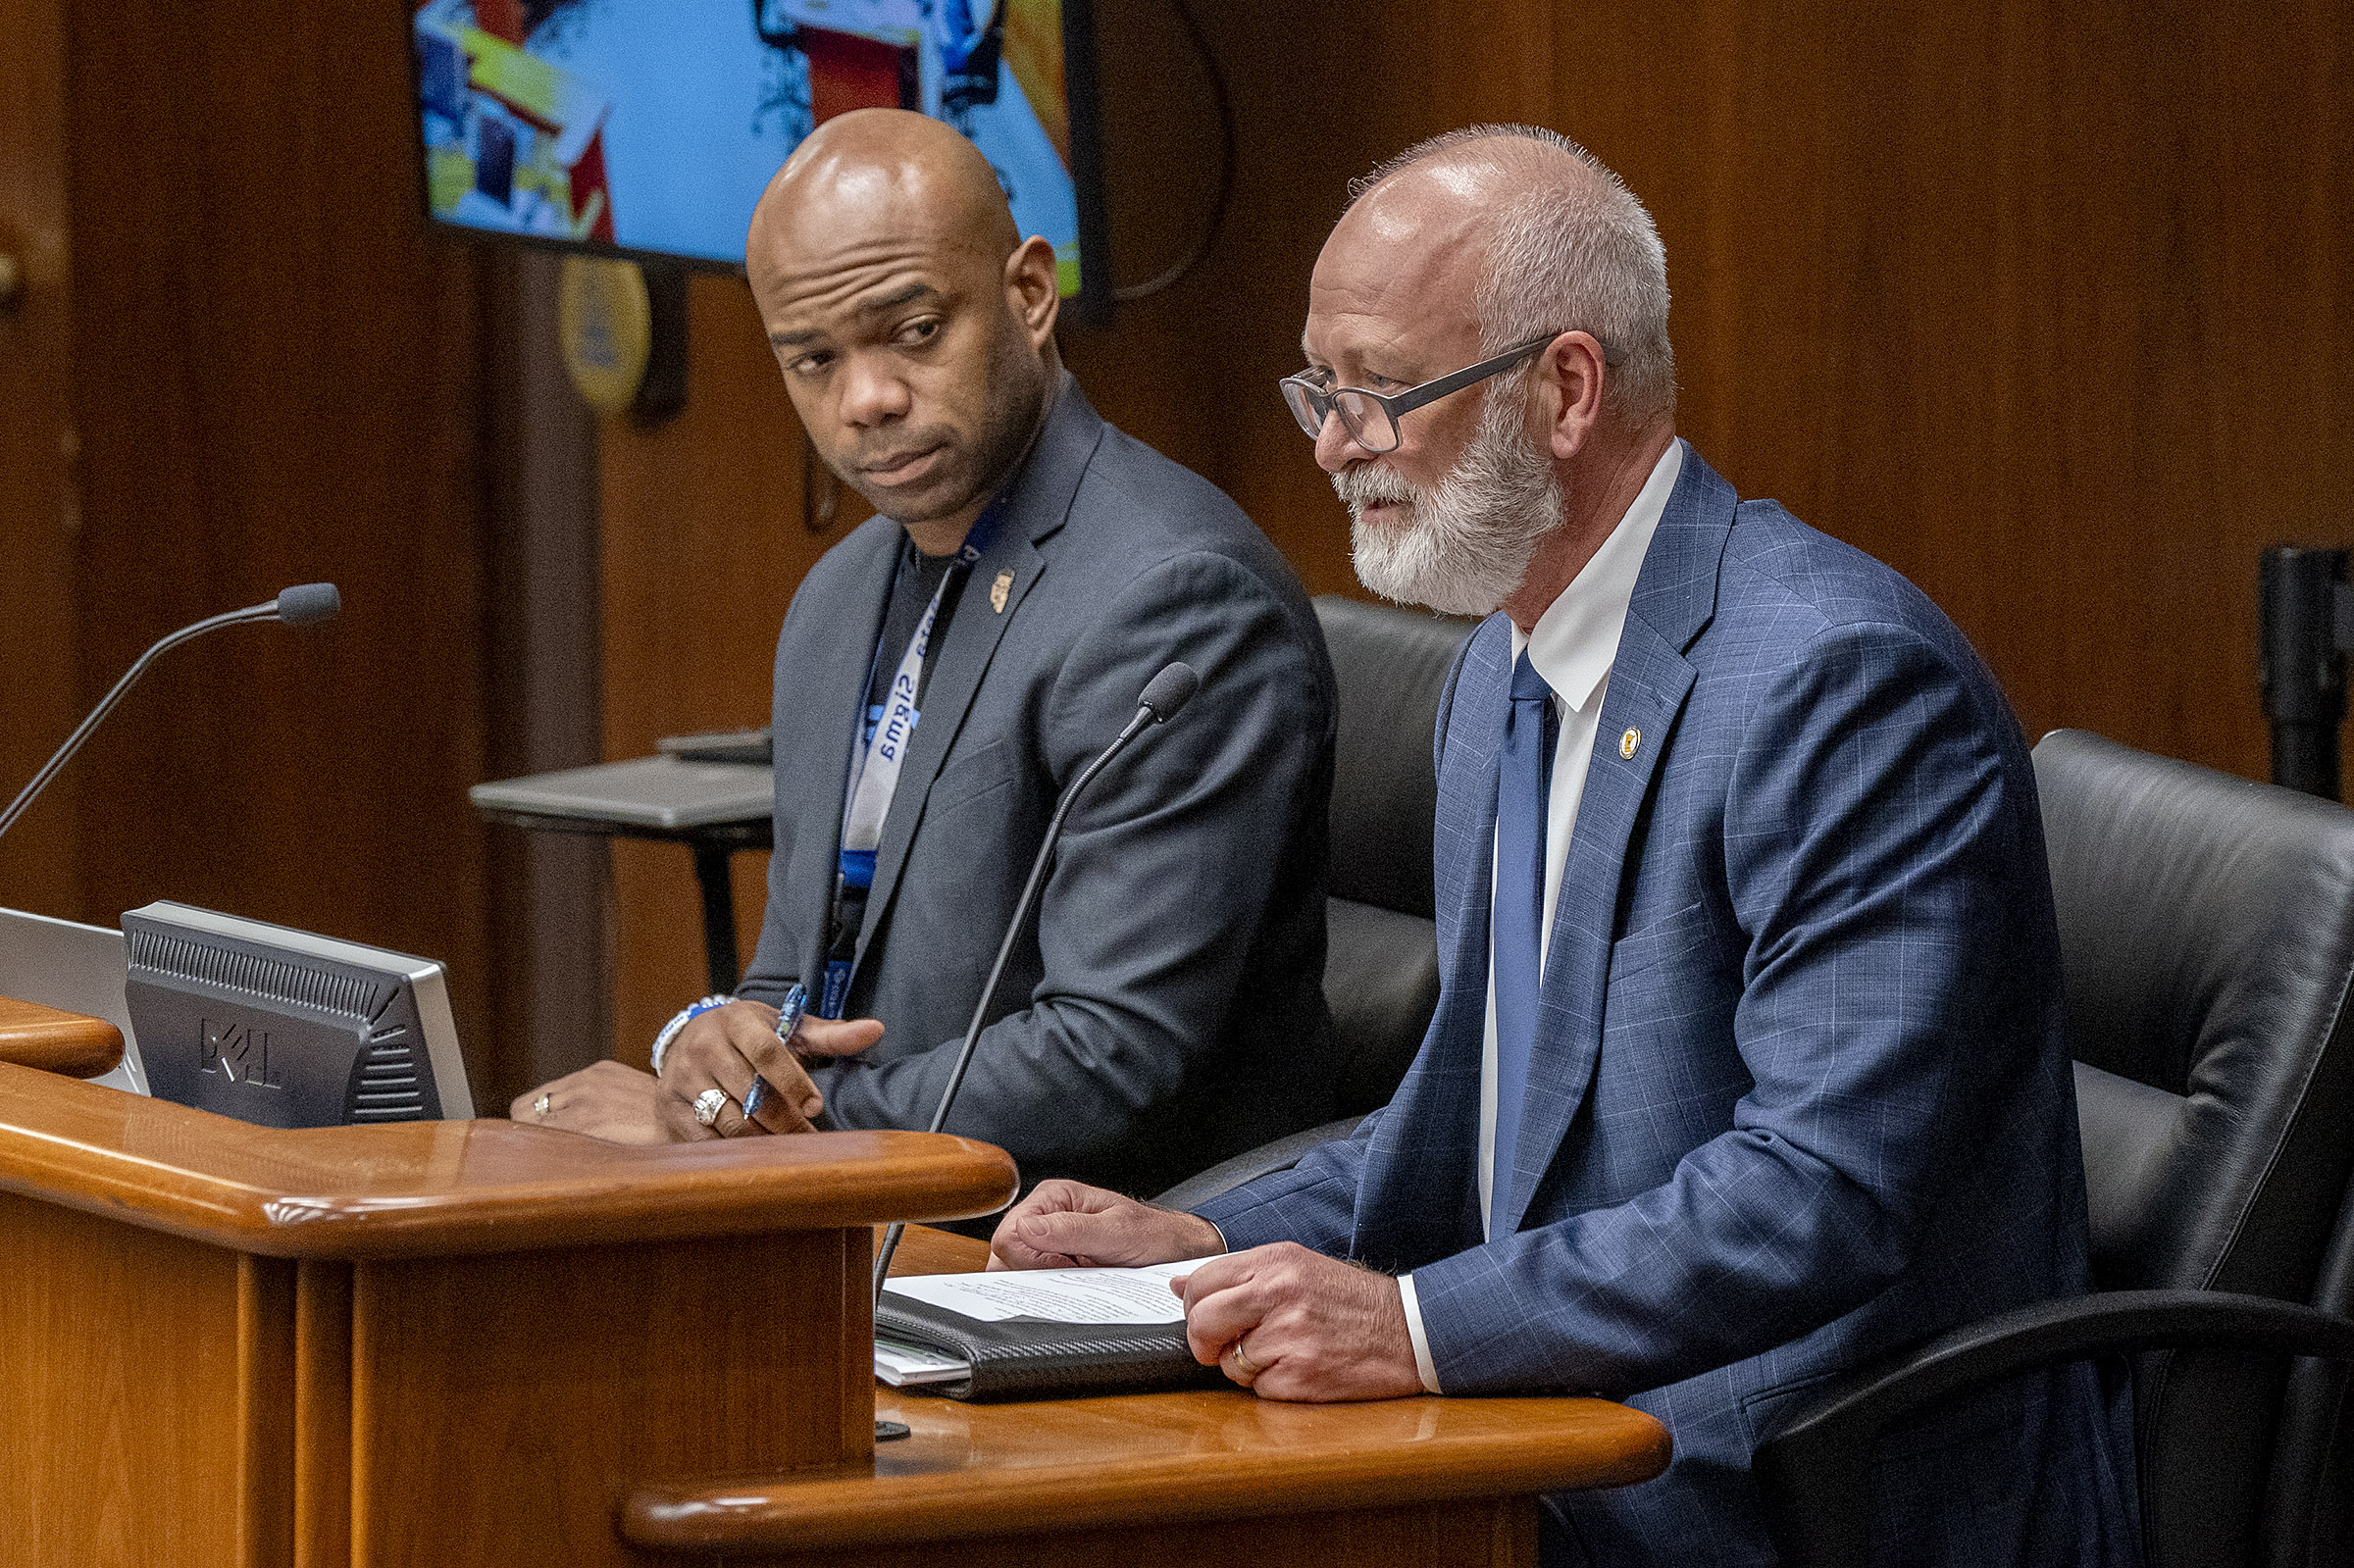 Public Safety Commissioner Bob Jacobson testifies before the House Education Policy Committee Feb. 12 regarding HF3489. Rep. Cedrick Frazier, left, is the bill sponsor. (Photo by Michele Jokinen)